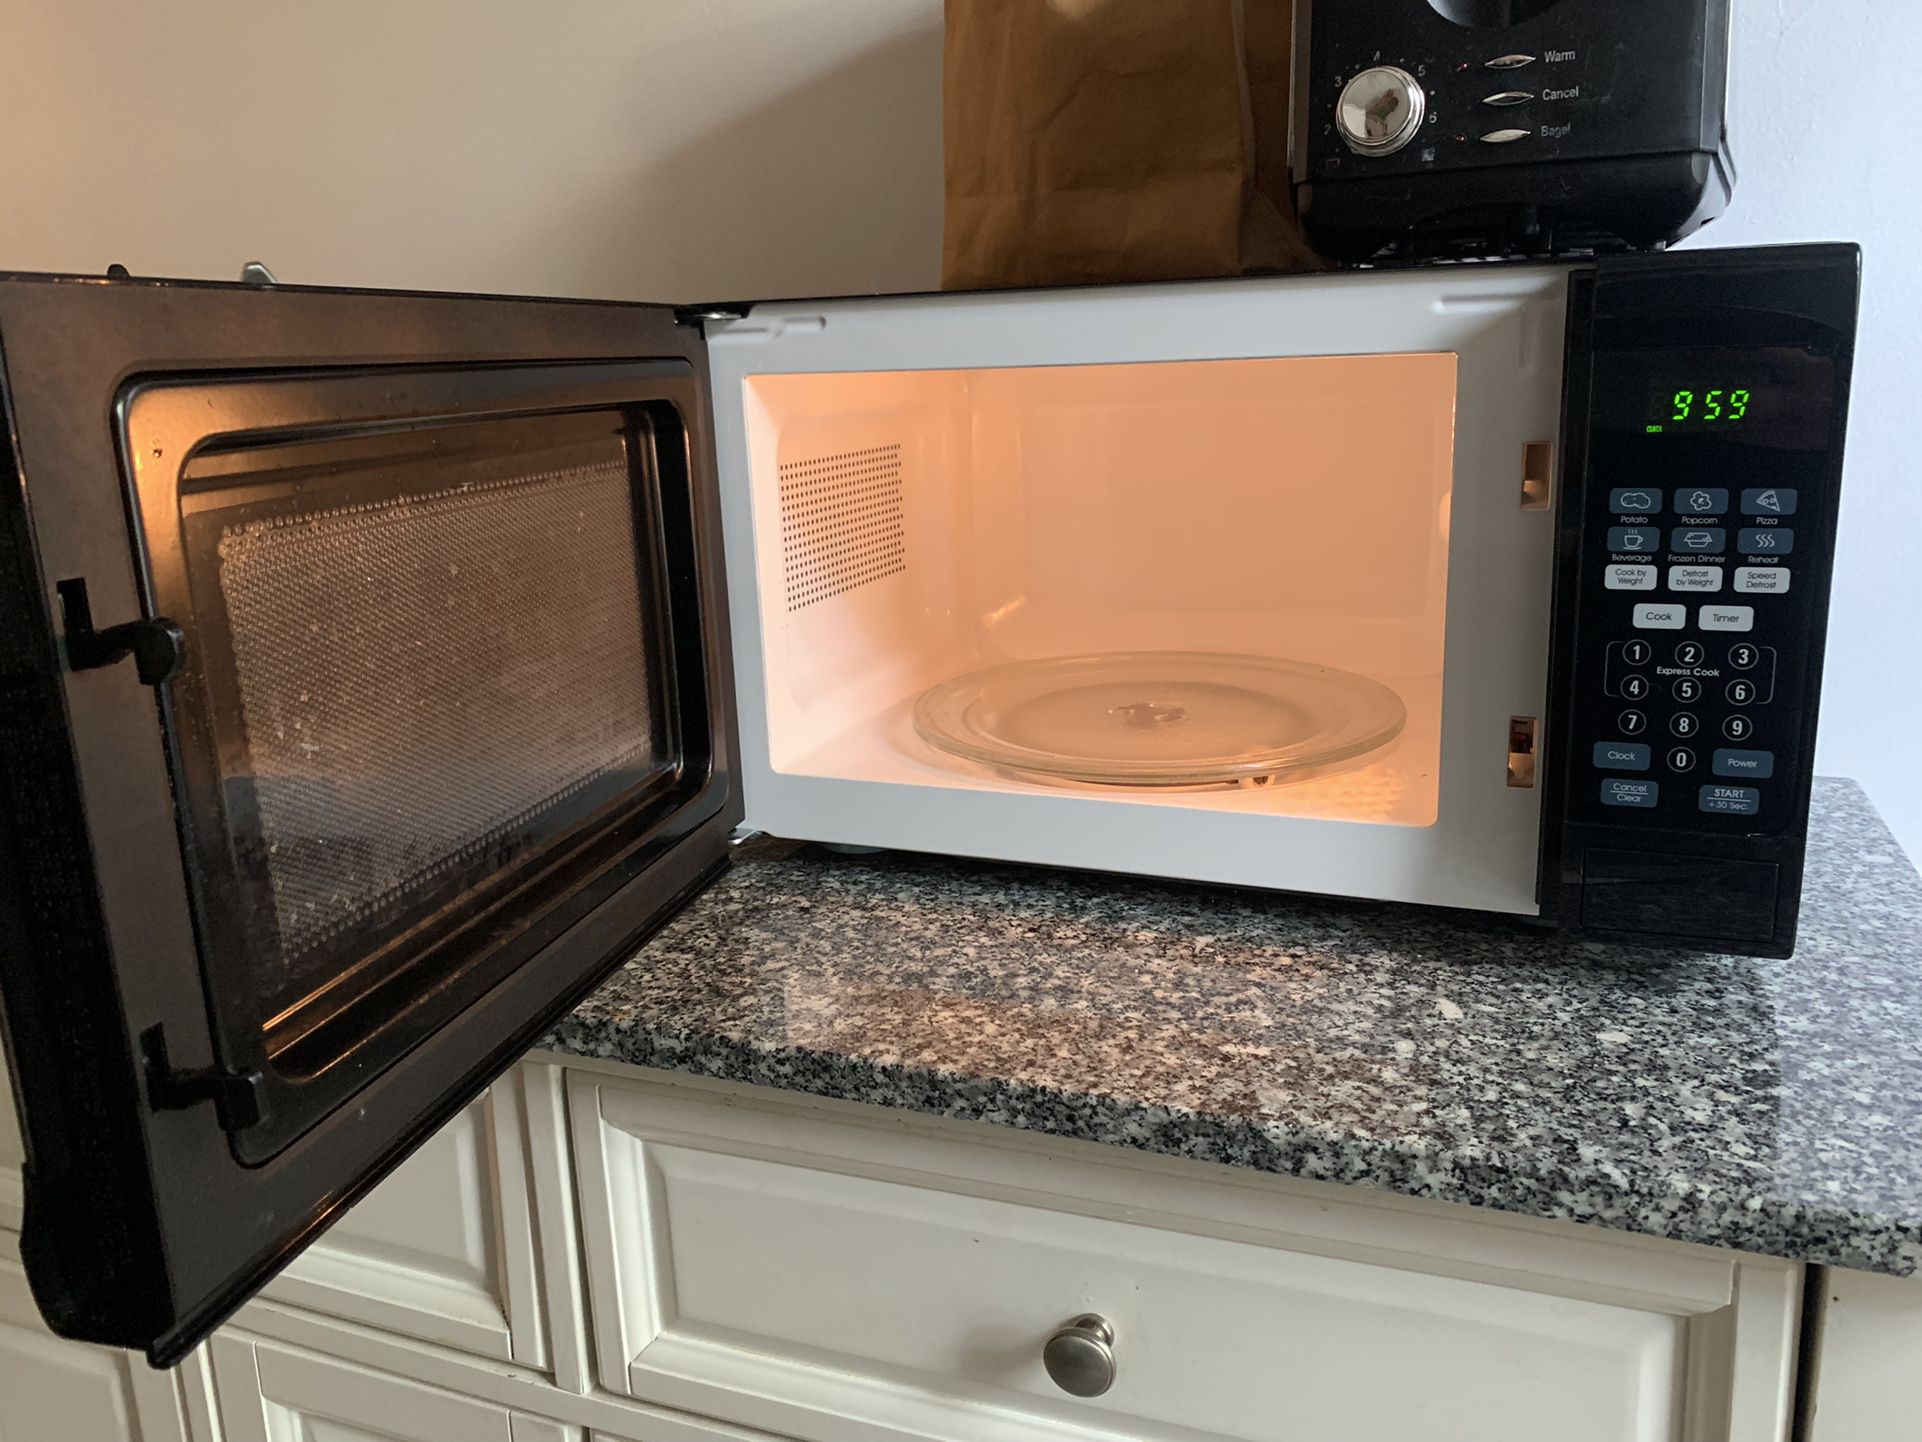 Microwave Oven Sunbeam for Sale in Chattanooga, TN - OfferUp